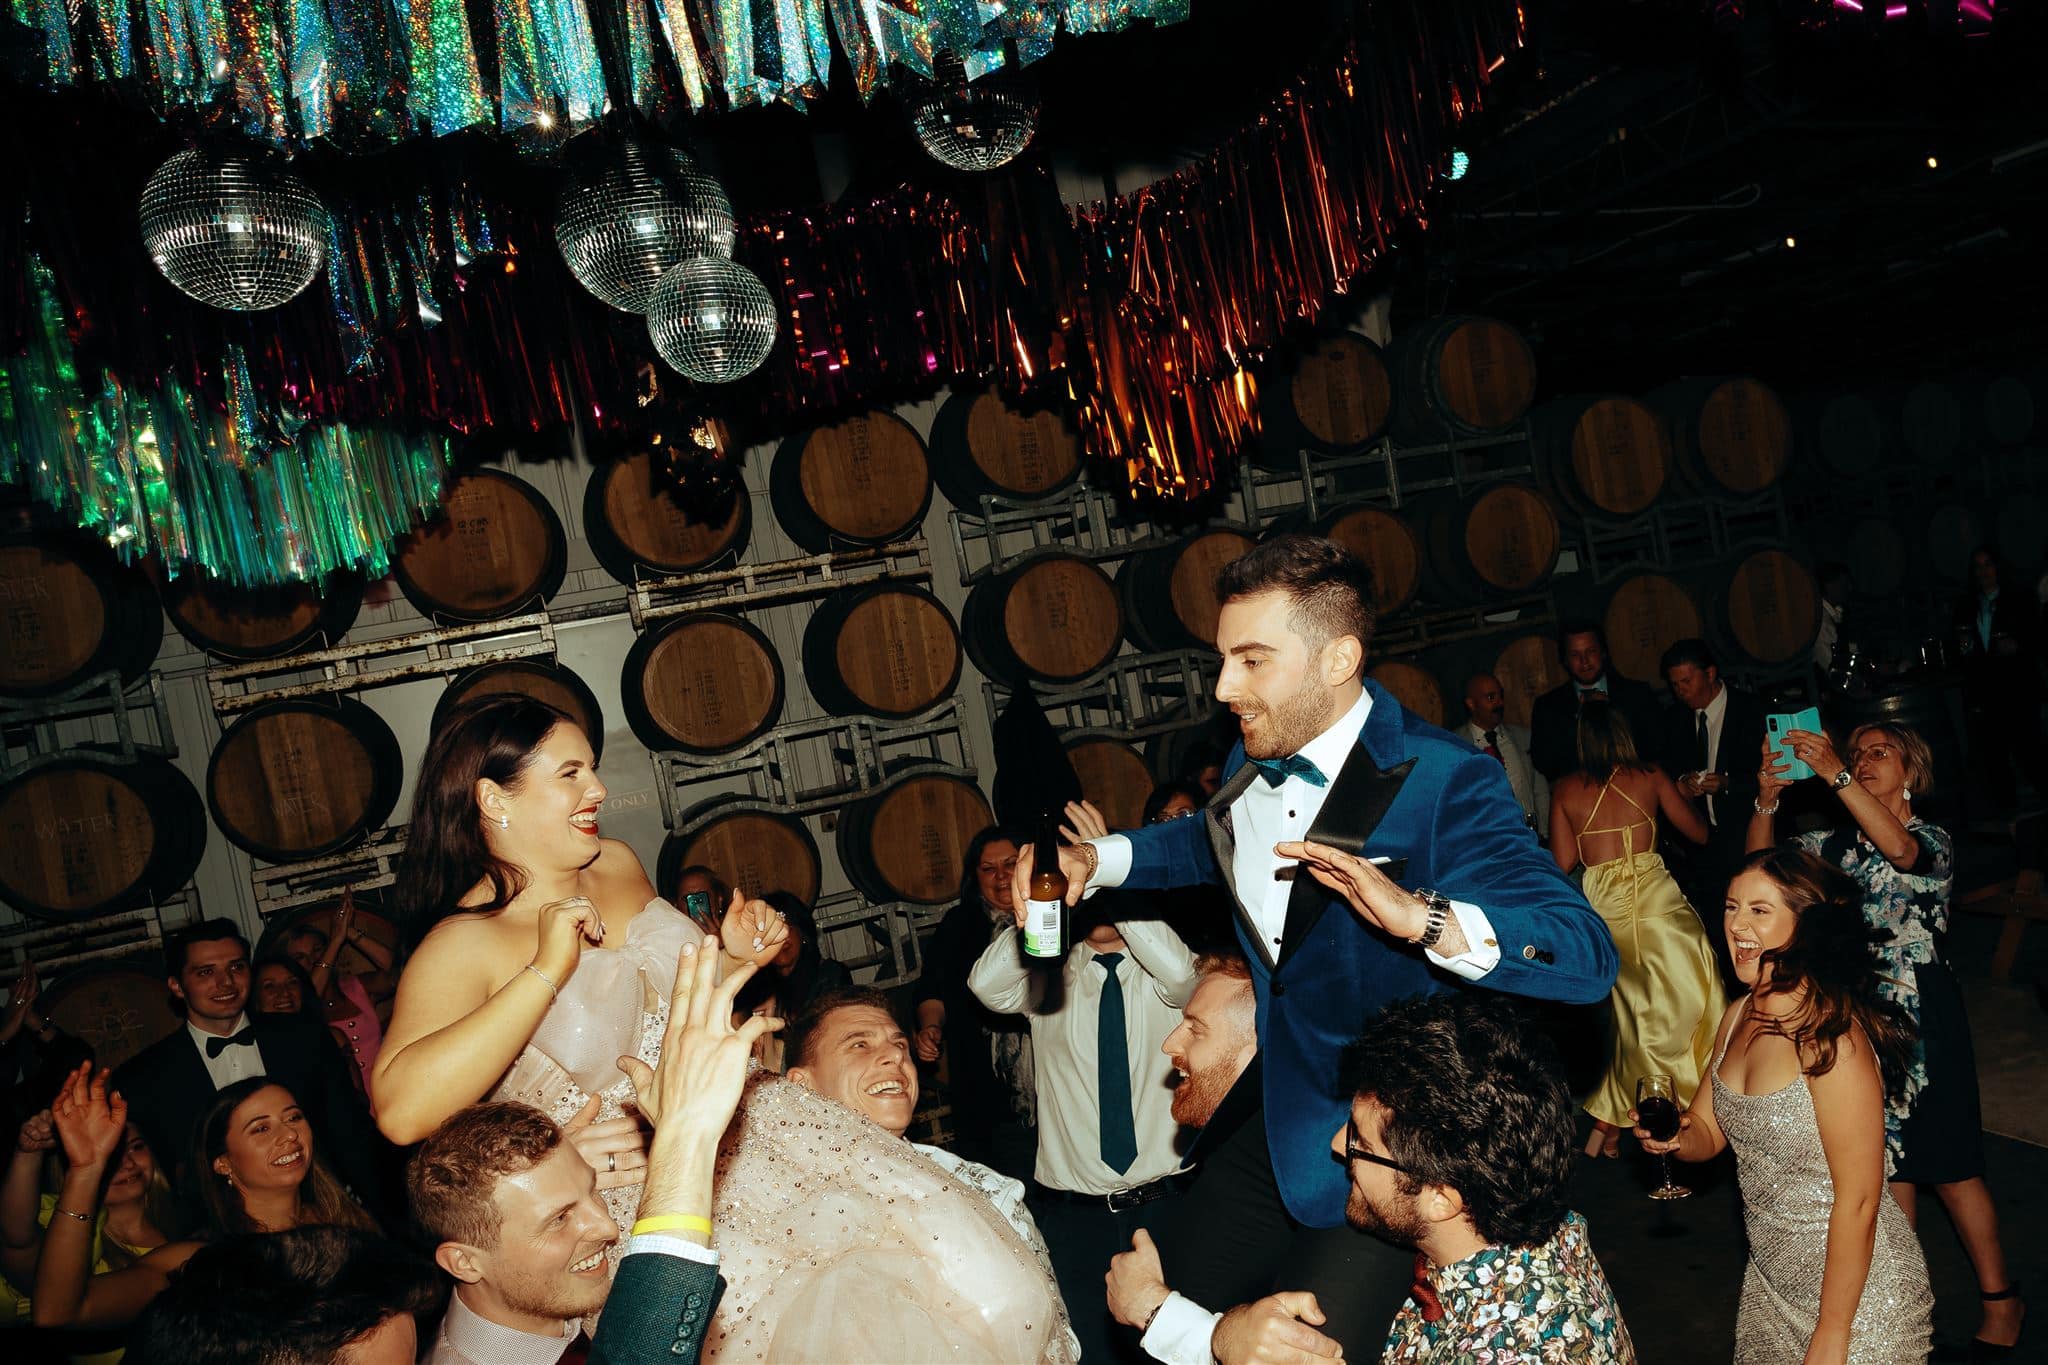 Fun Disco Themed Wedding with Wine Barrels Photographed by Jackson Grant